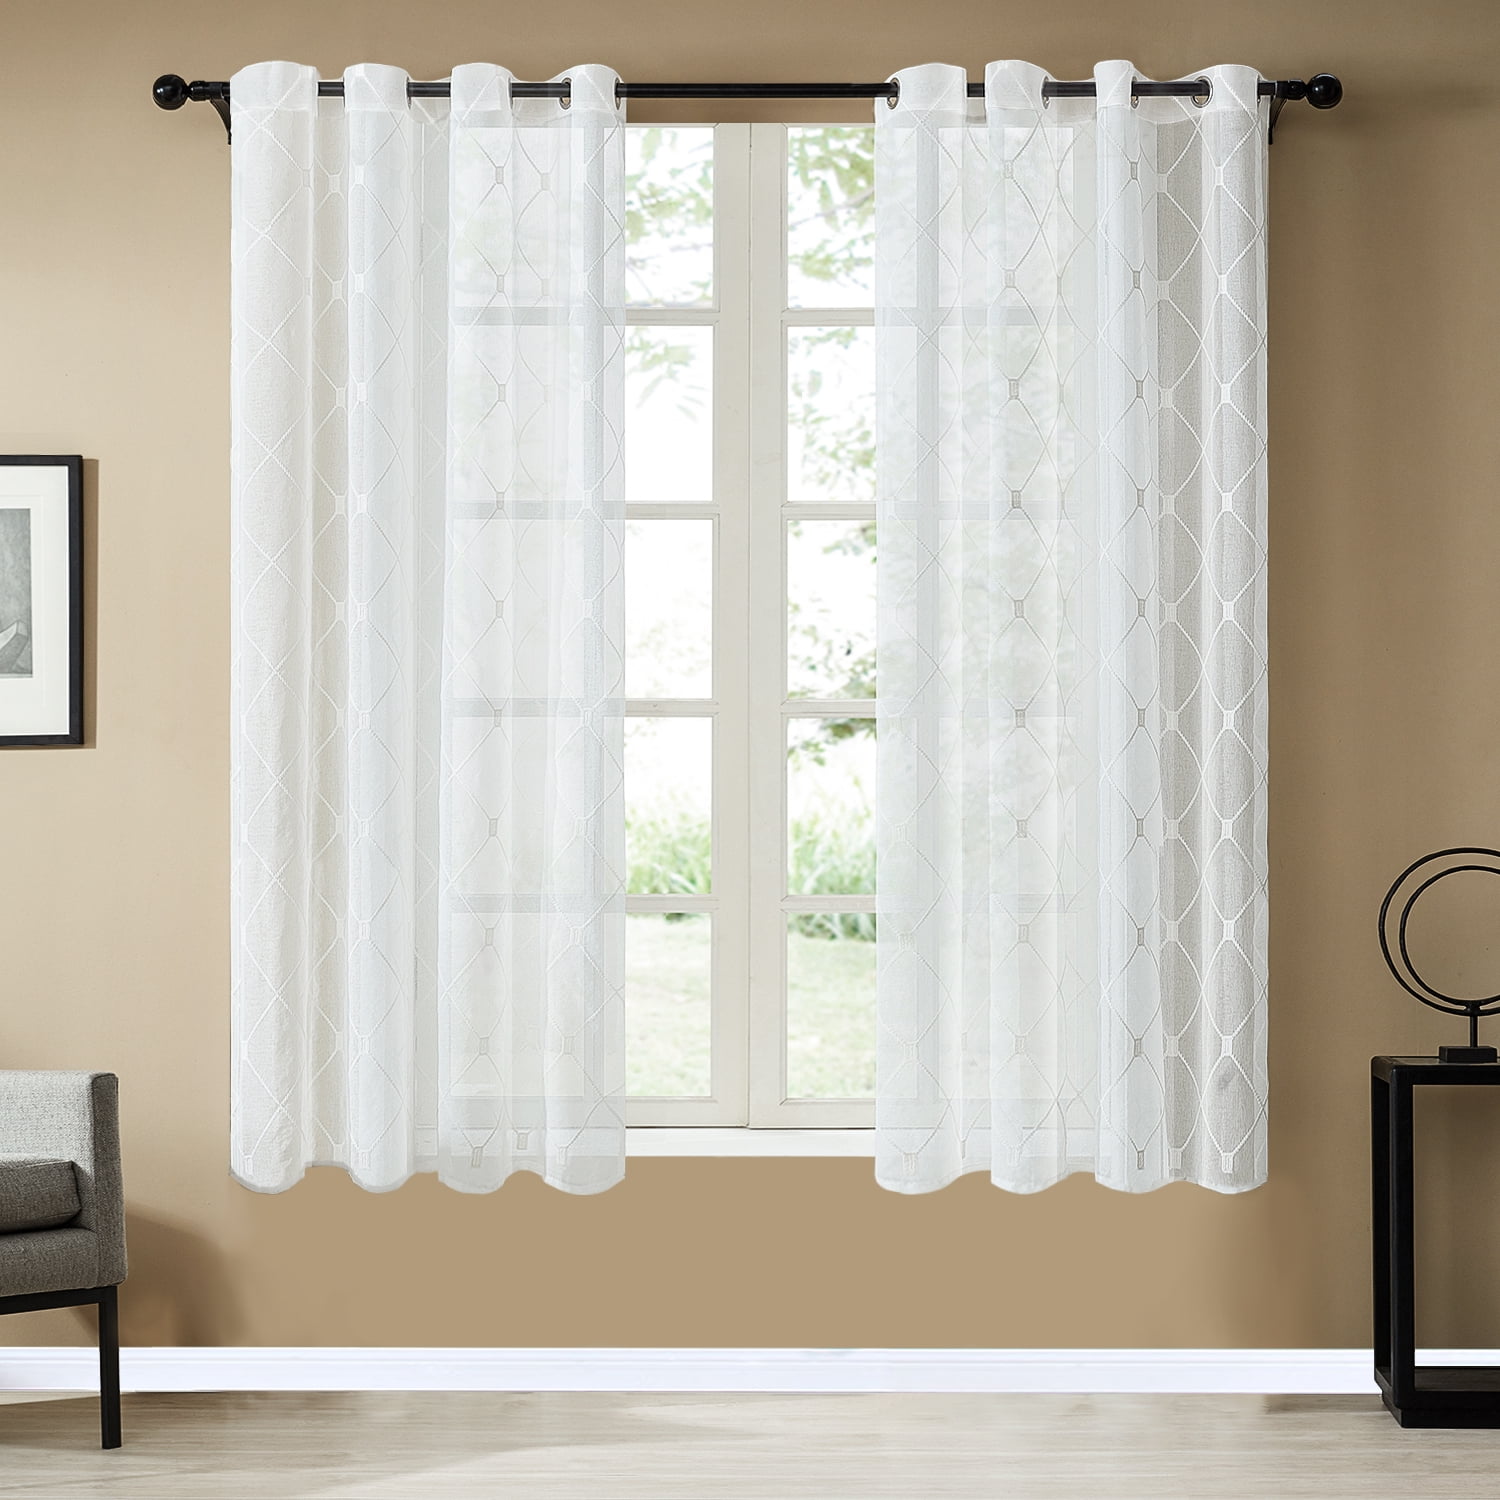 2 Pack Fully Stitched Sheer Window Curtain Drapes Panel Treatment 60"x84" White 